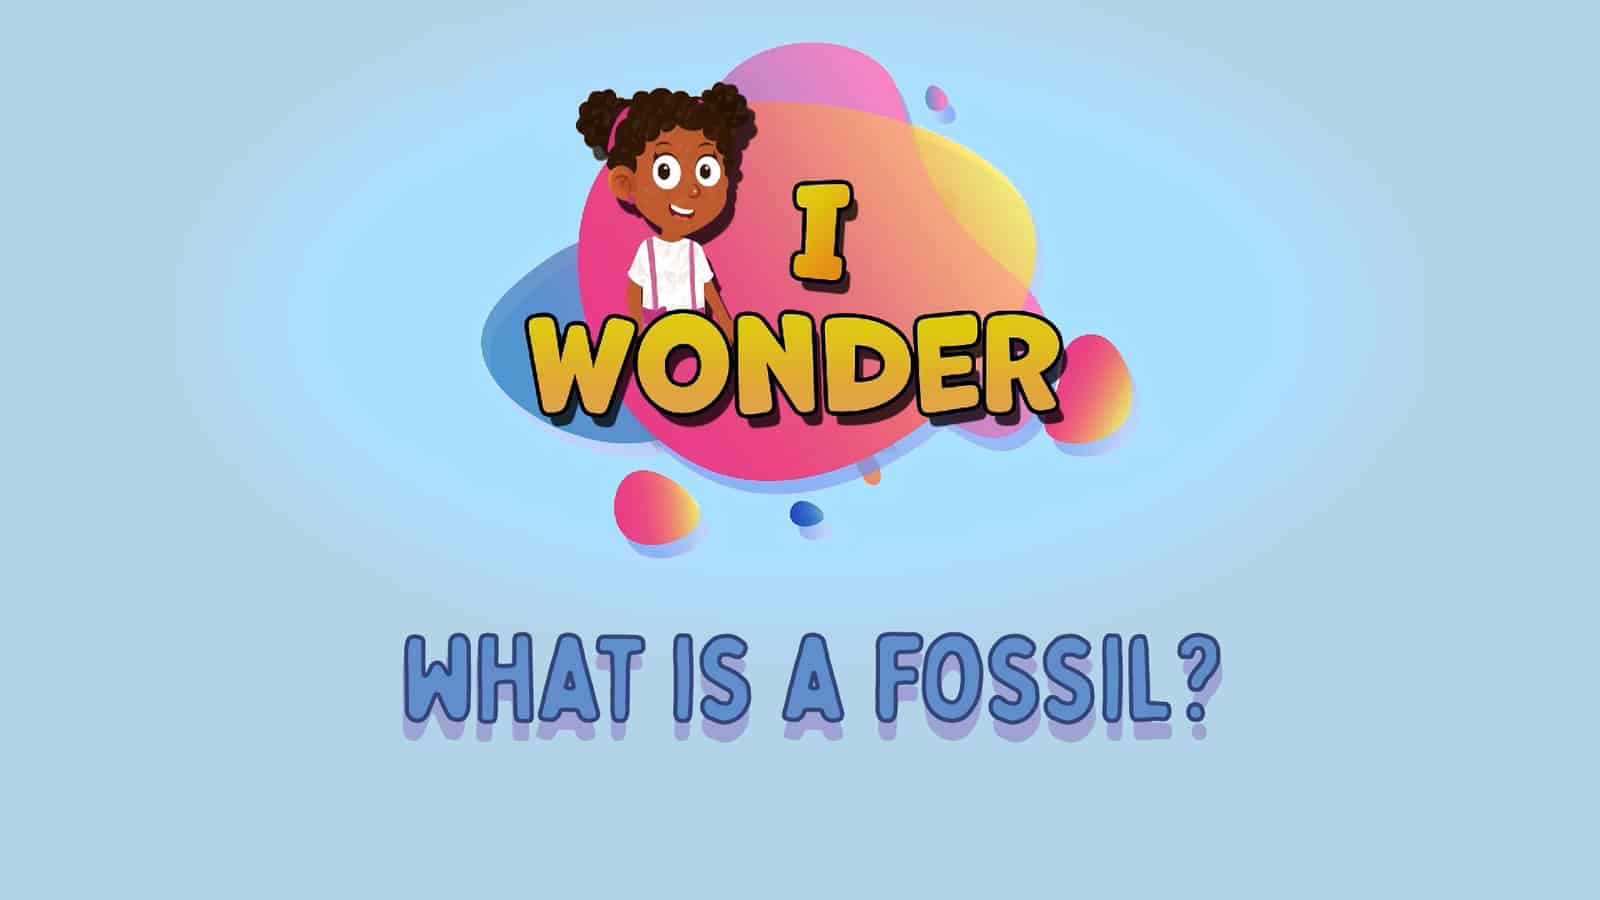 What Is A Fossil?